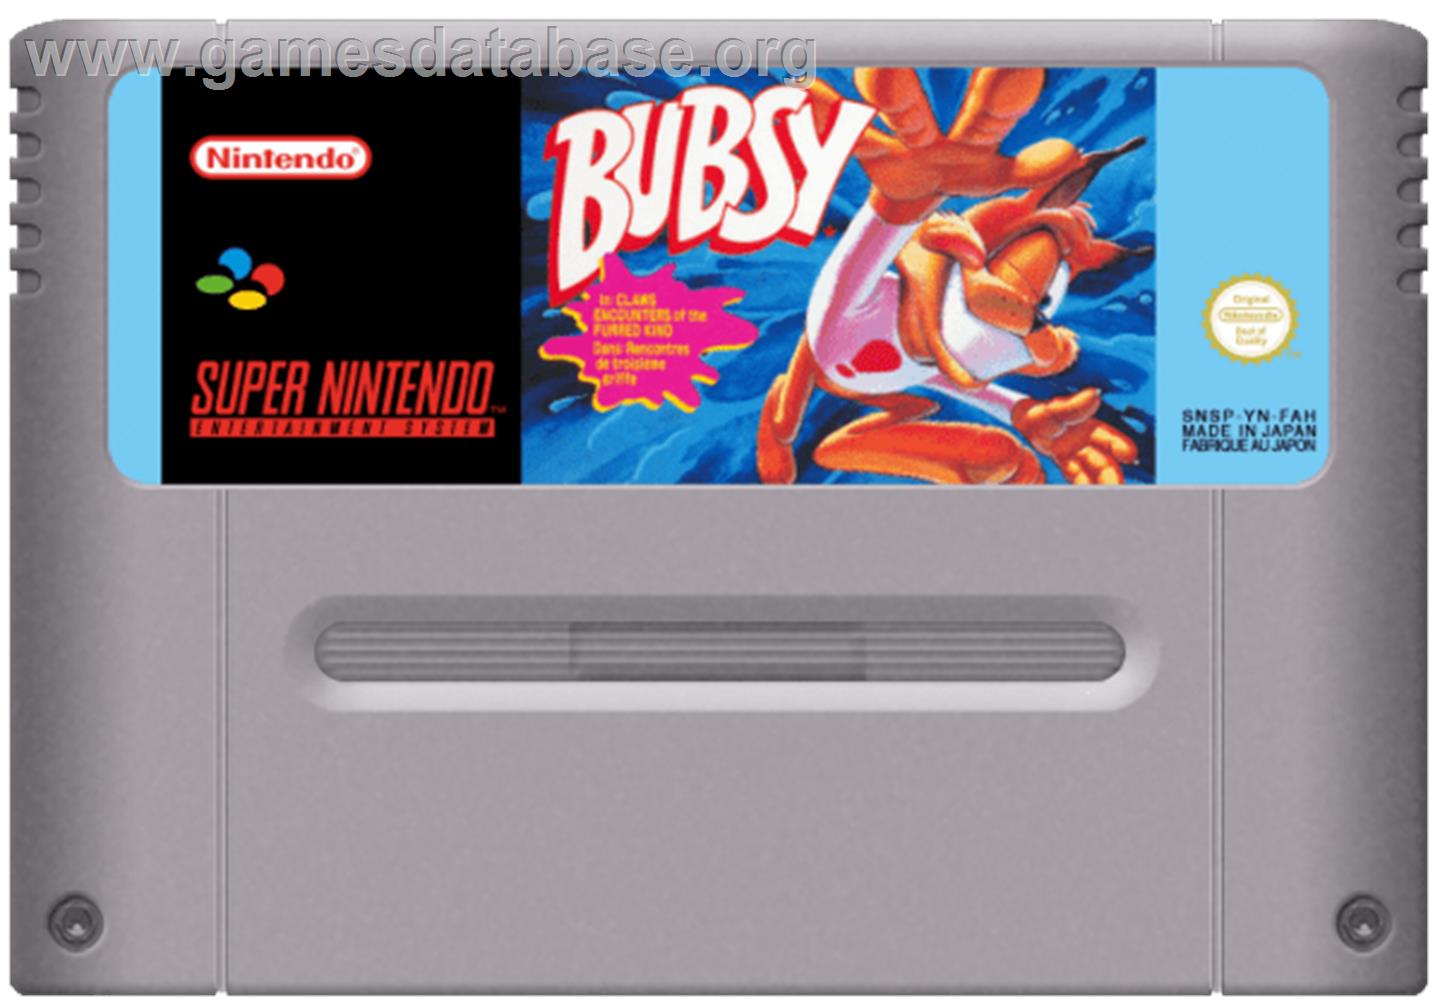 Bubsy in: Claws Encounters of the Furred Kind - Nintendo SNES - Artwork - Cartridge